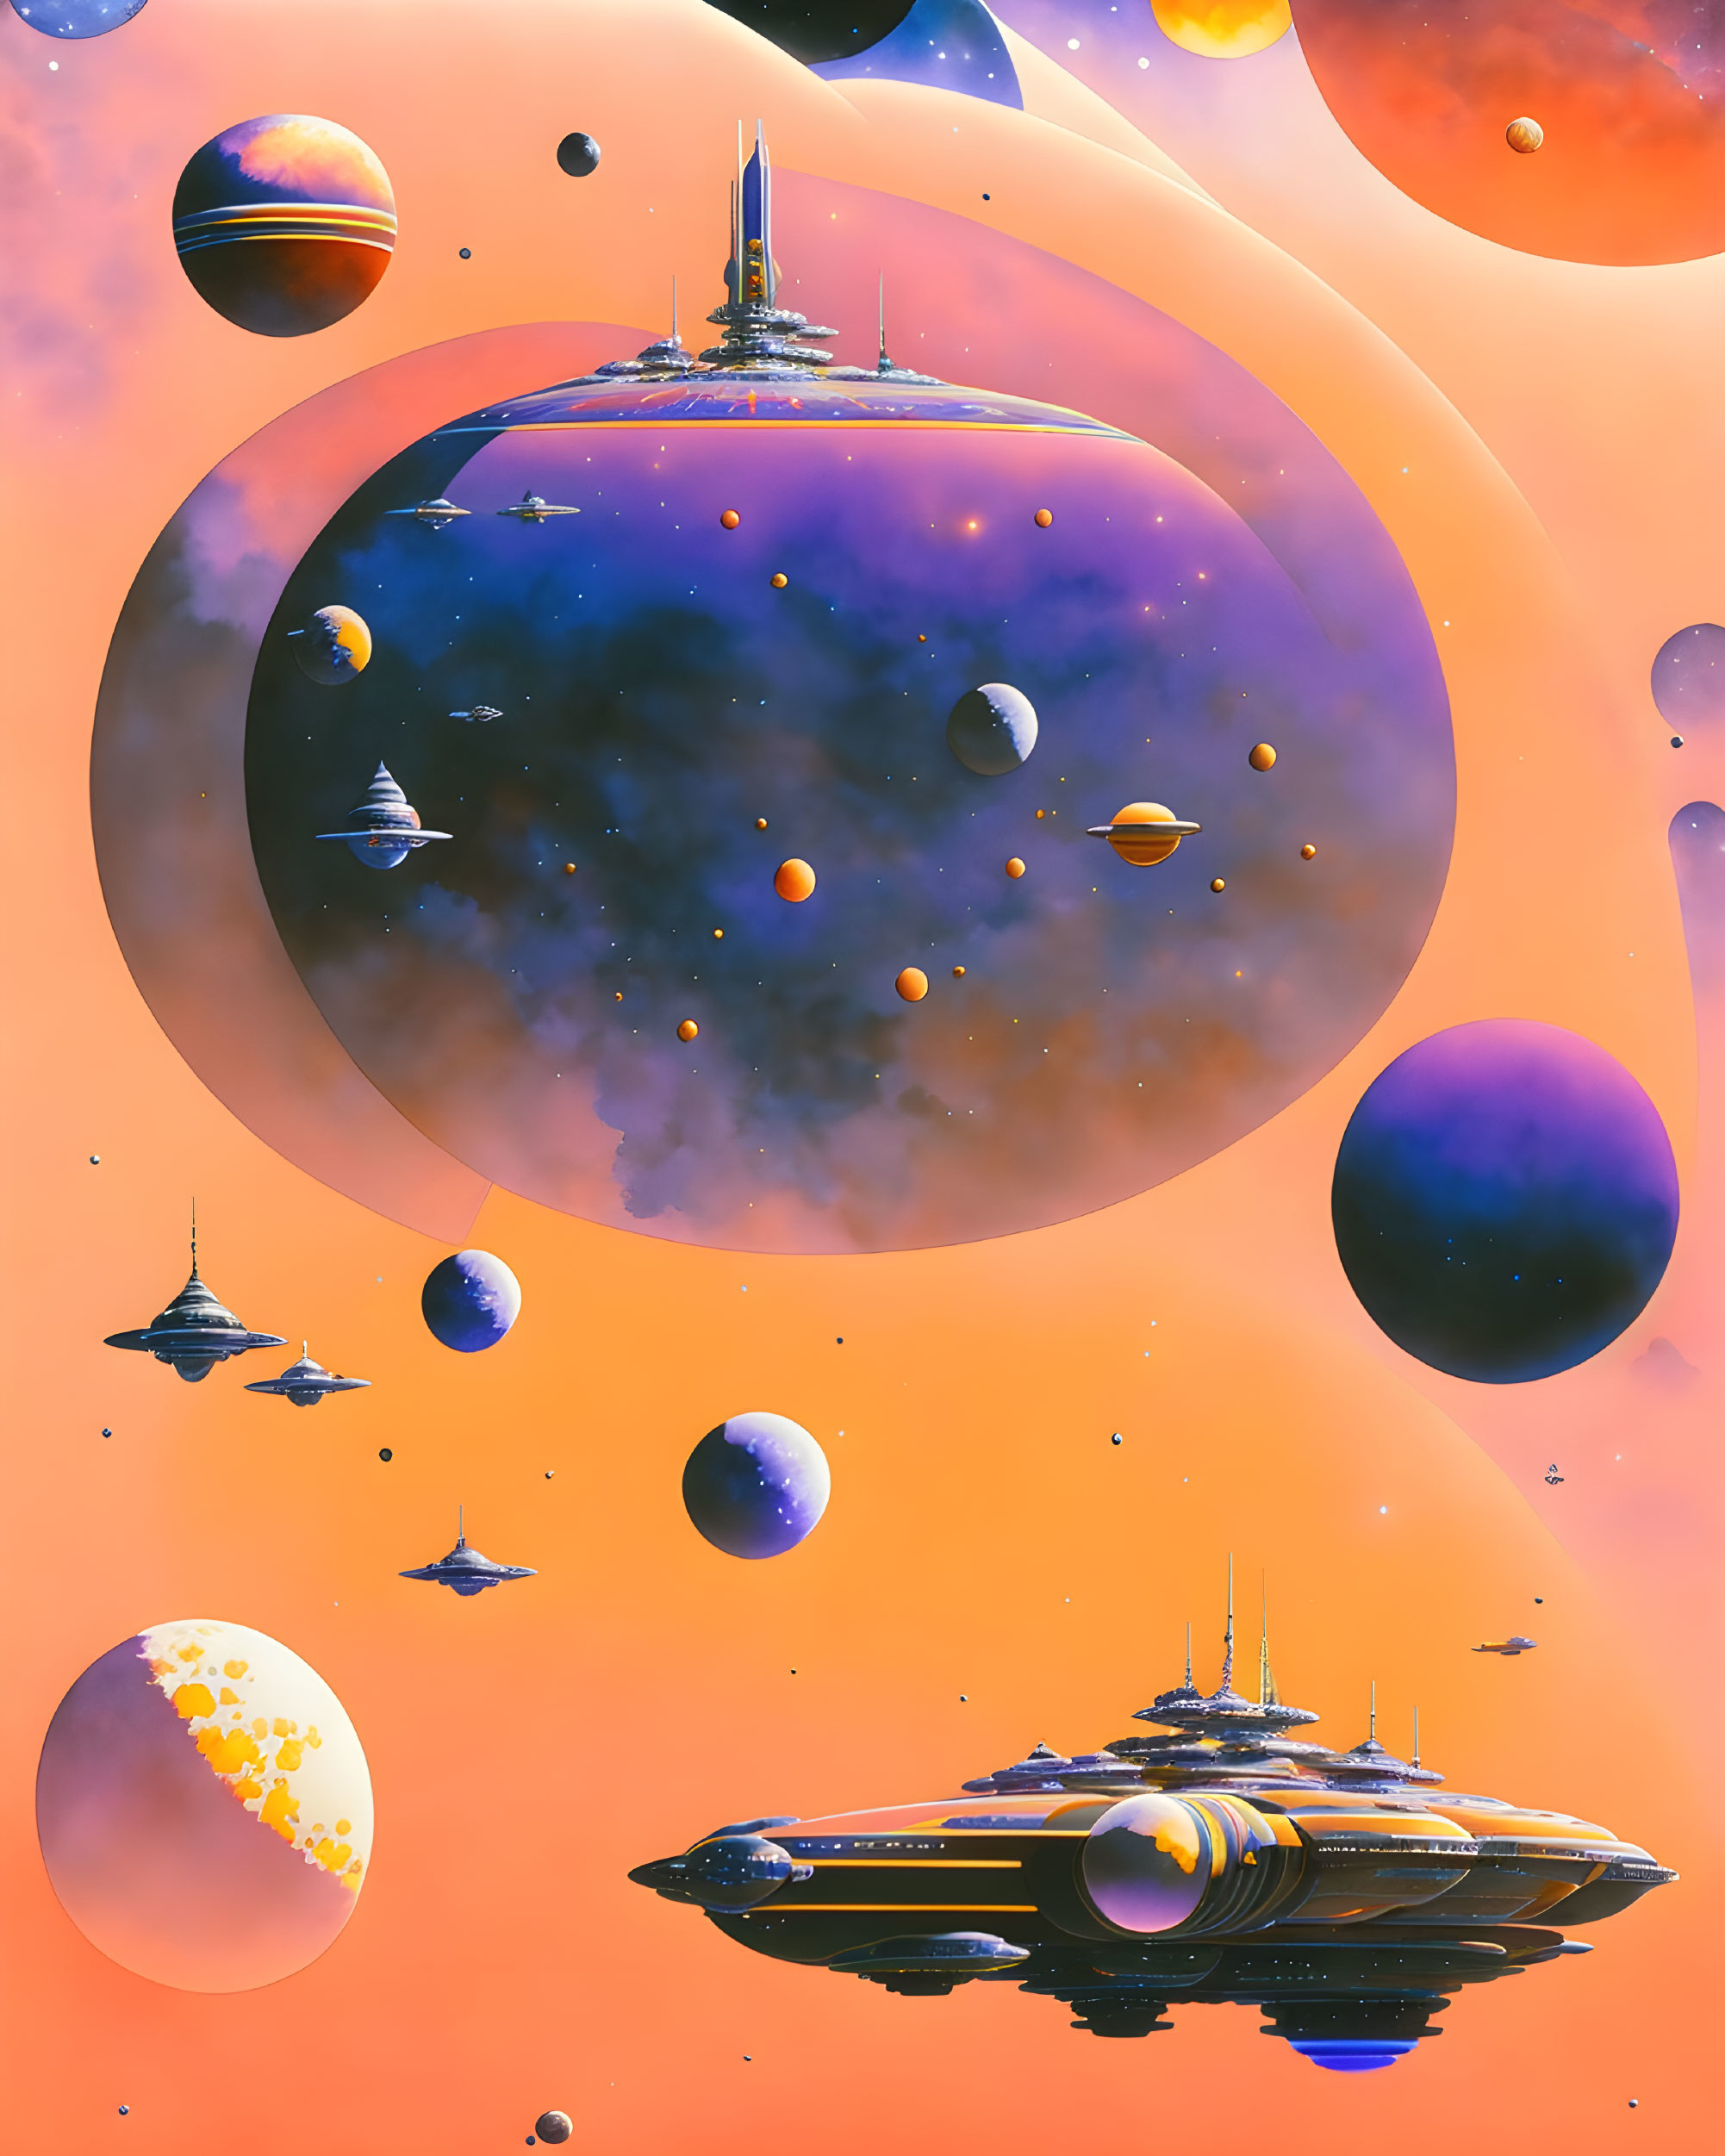 Cosmic Odyssey: A Colorful Space Adventure